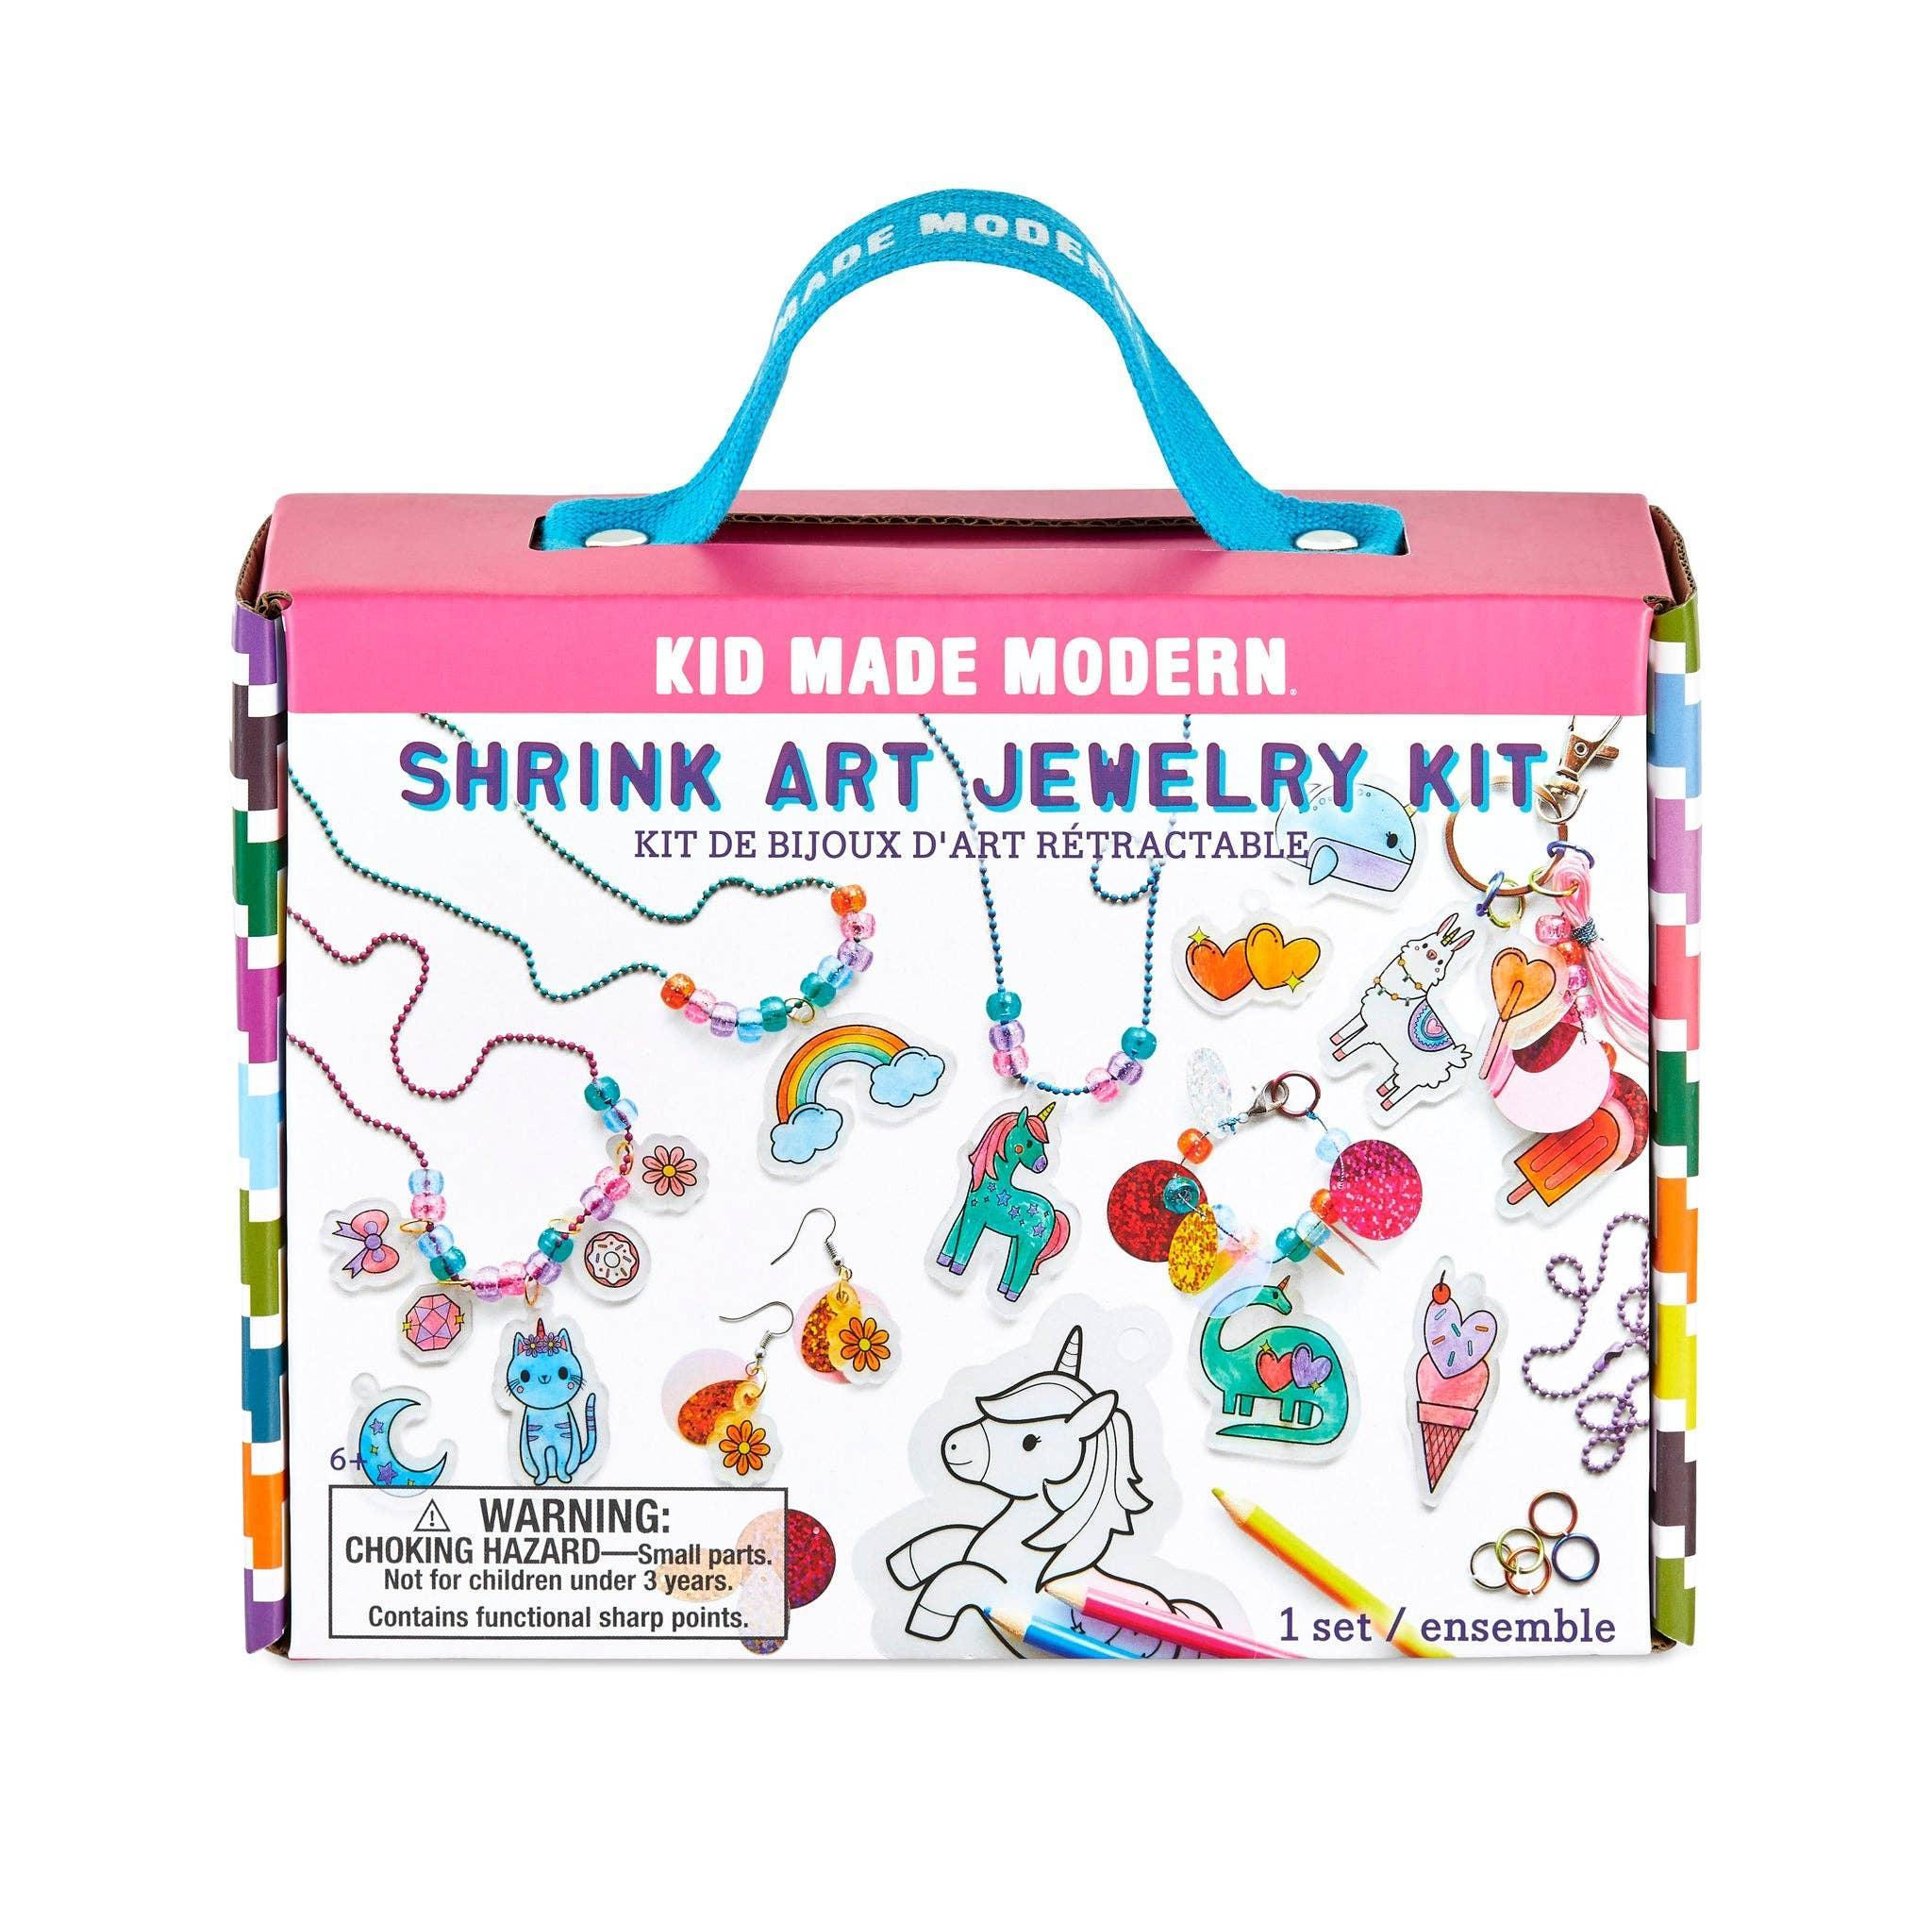 Shrink Art Jewelry Kit - Kid Made Modern - Why and Whale